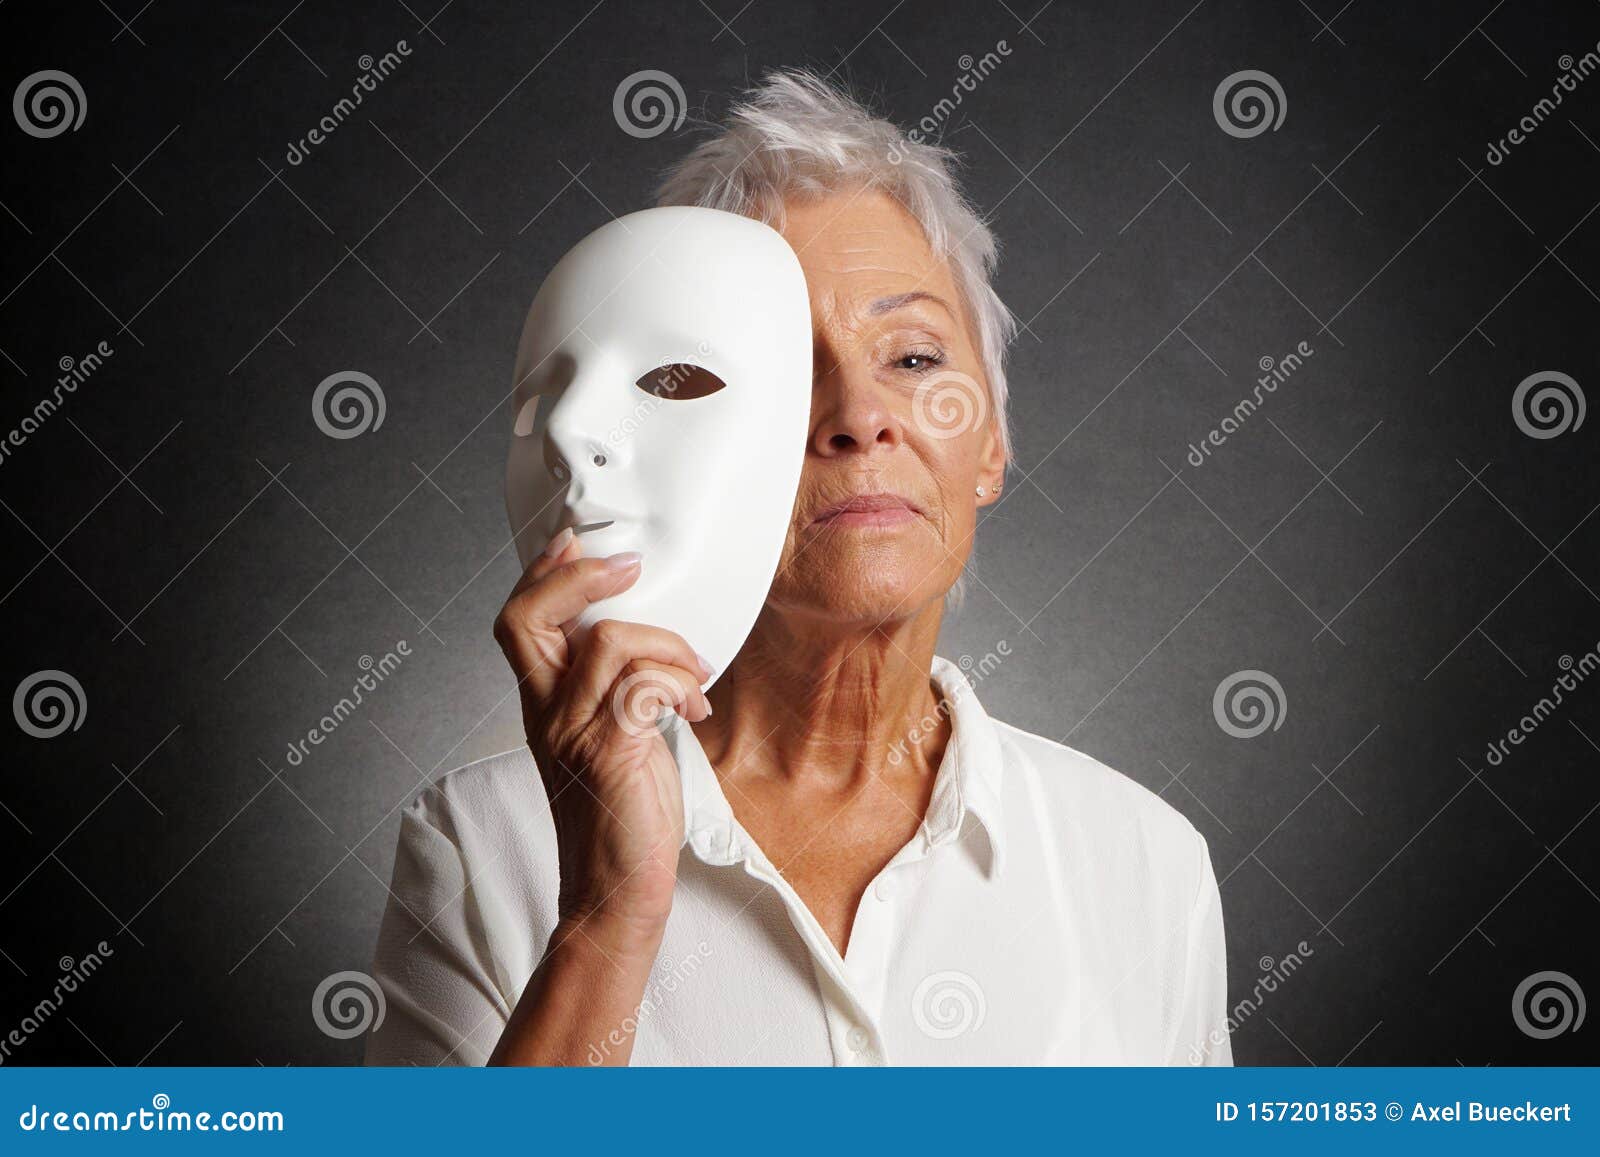 serious older woman revealing face behind mask